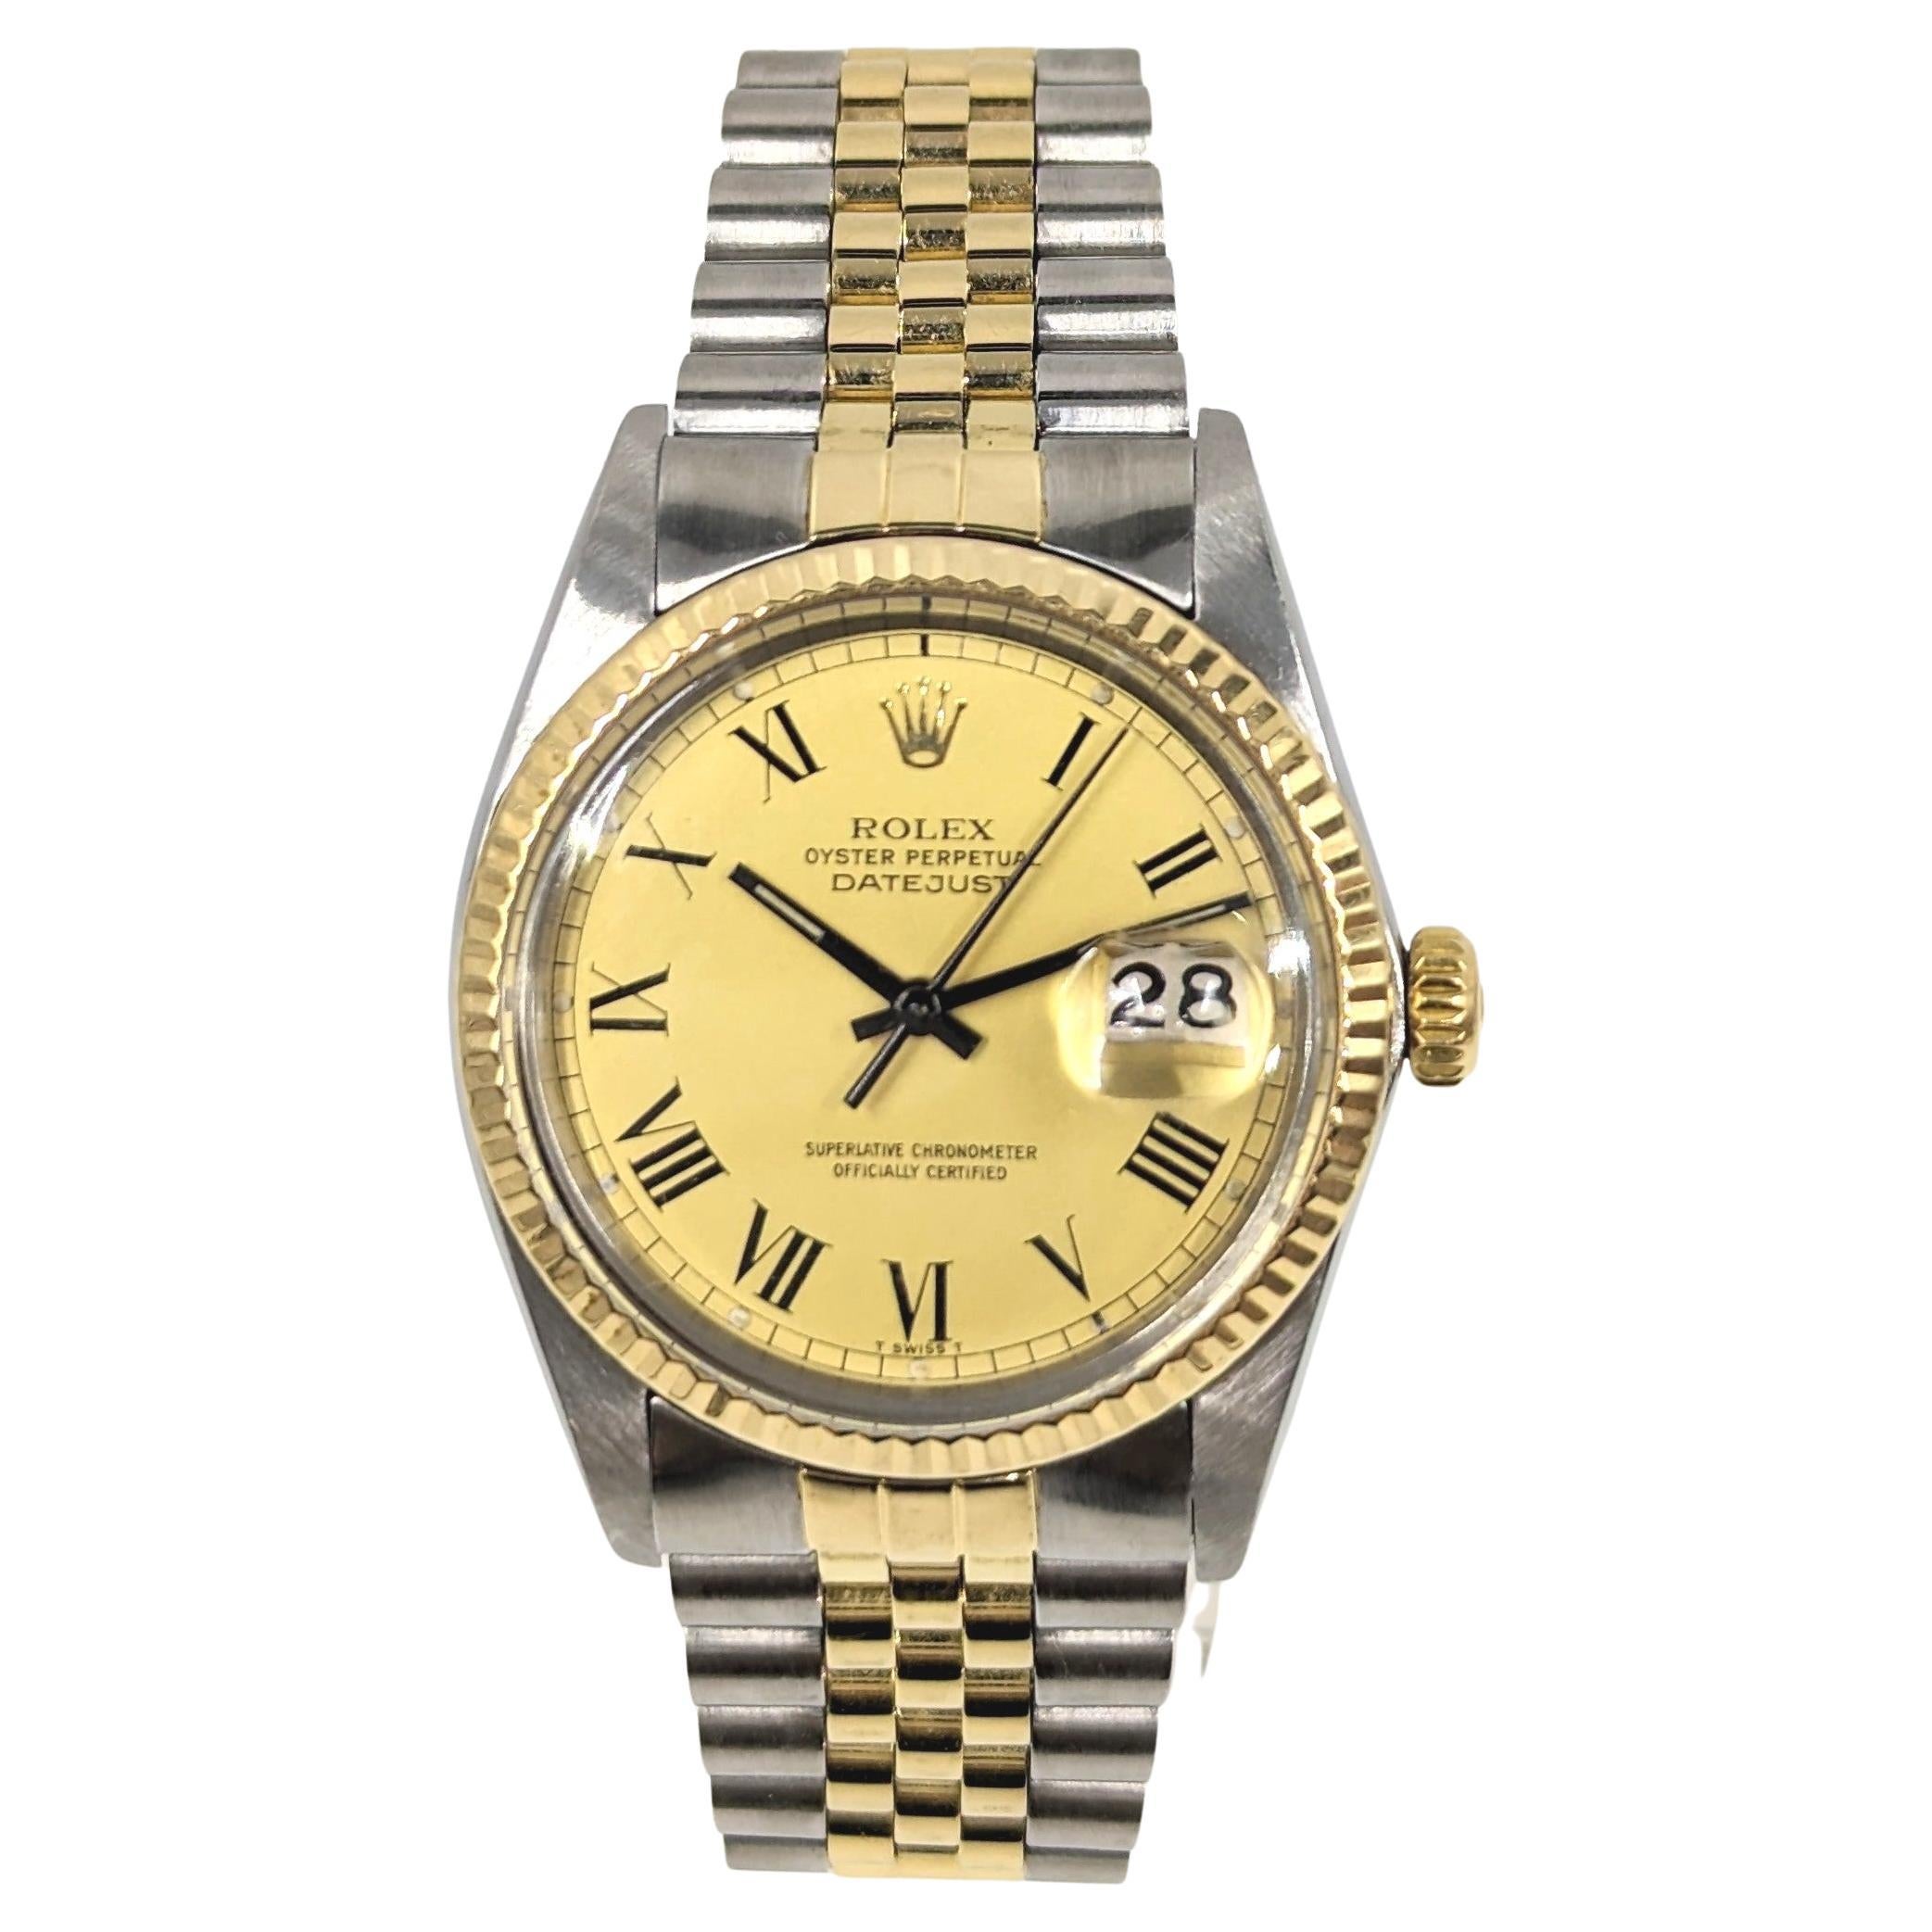 Rolex Oyster Perpetual Datejust 18k/SS YG 2tone Watch Collectible Buckley 16013 For Sale